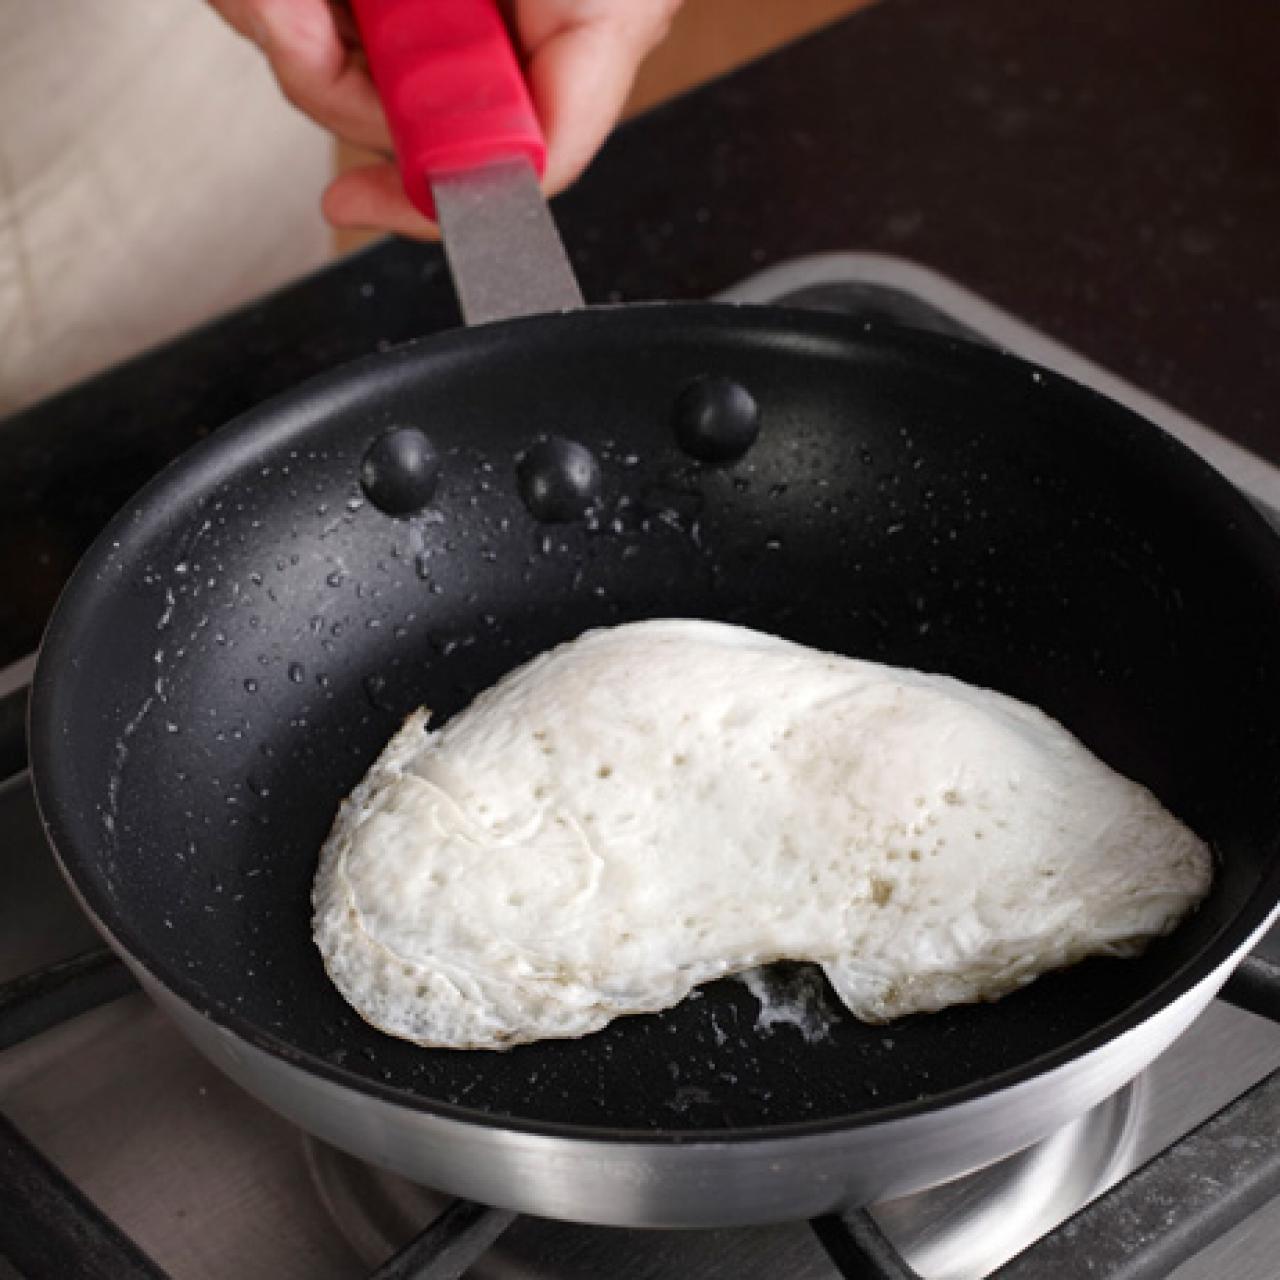 Flip Food in a Frying Pan Easily With This Trick